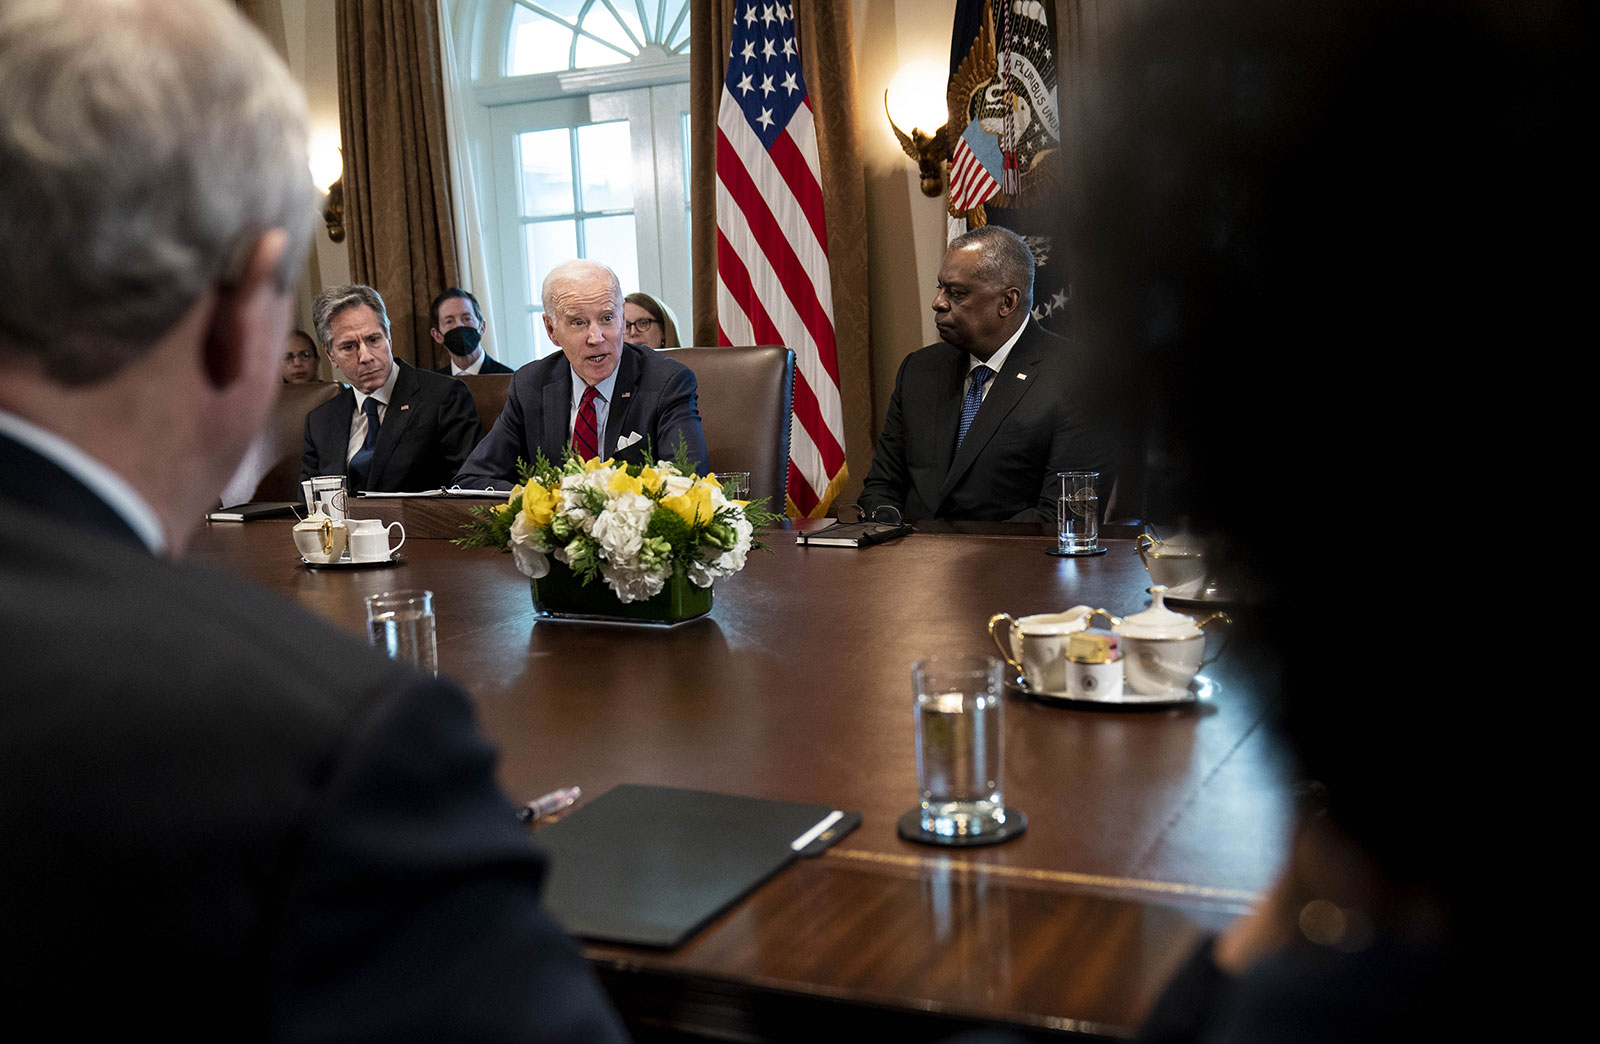 President Biden speaks during a cabinet meeting at the White House on Thursday, January 5.